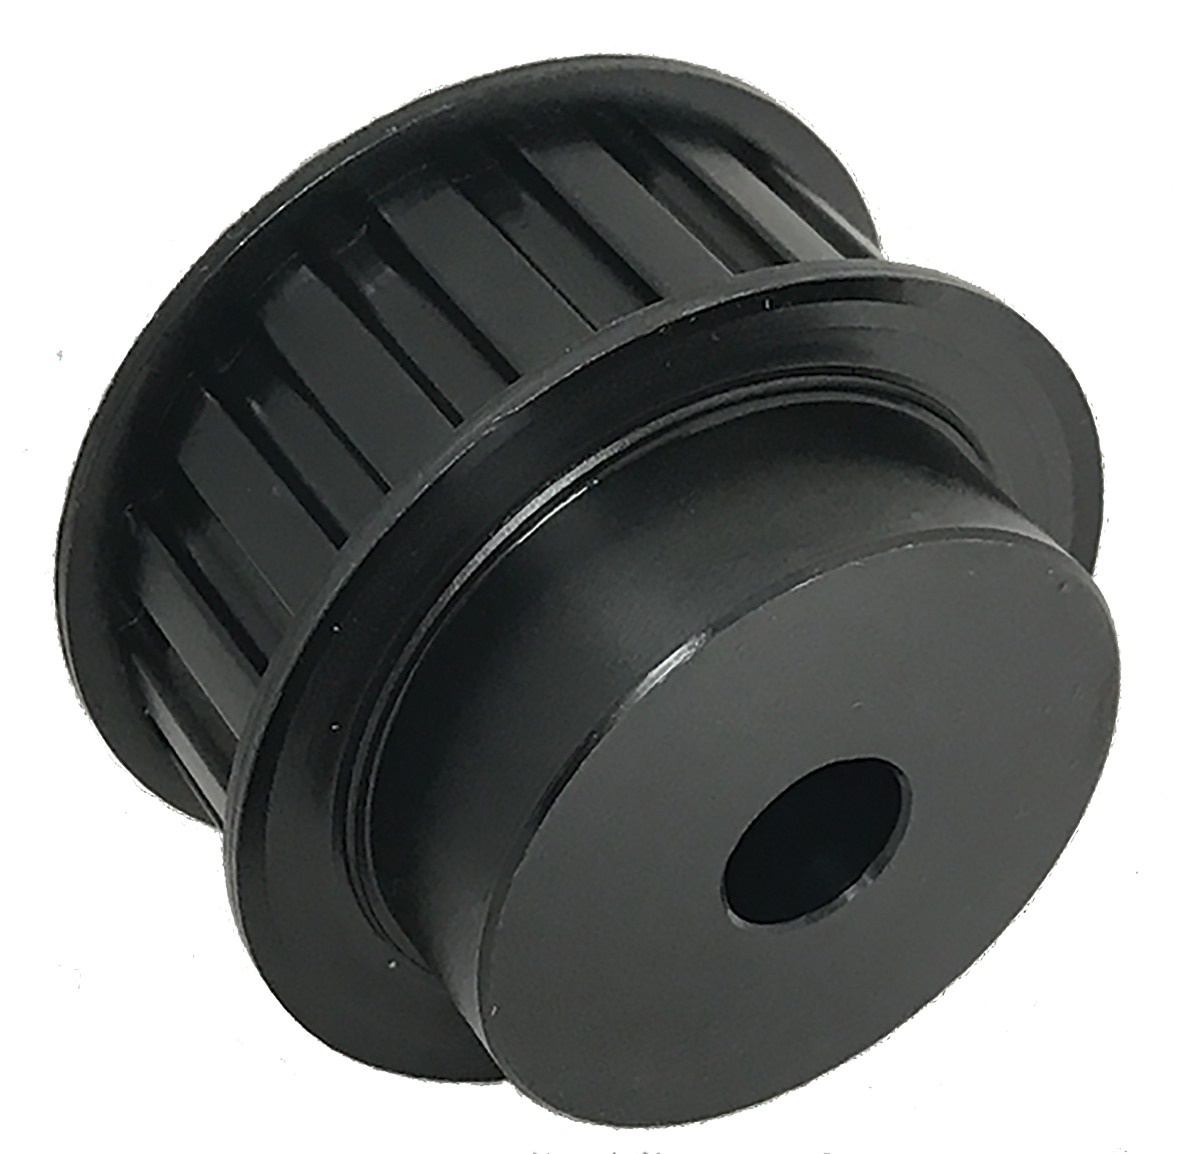 18H100-6FS7 - Steel Imperial Pitch Pulleys